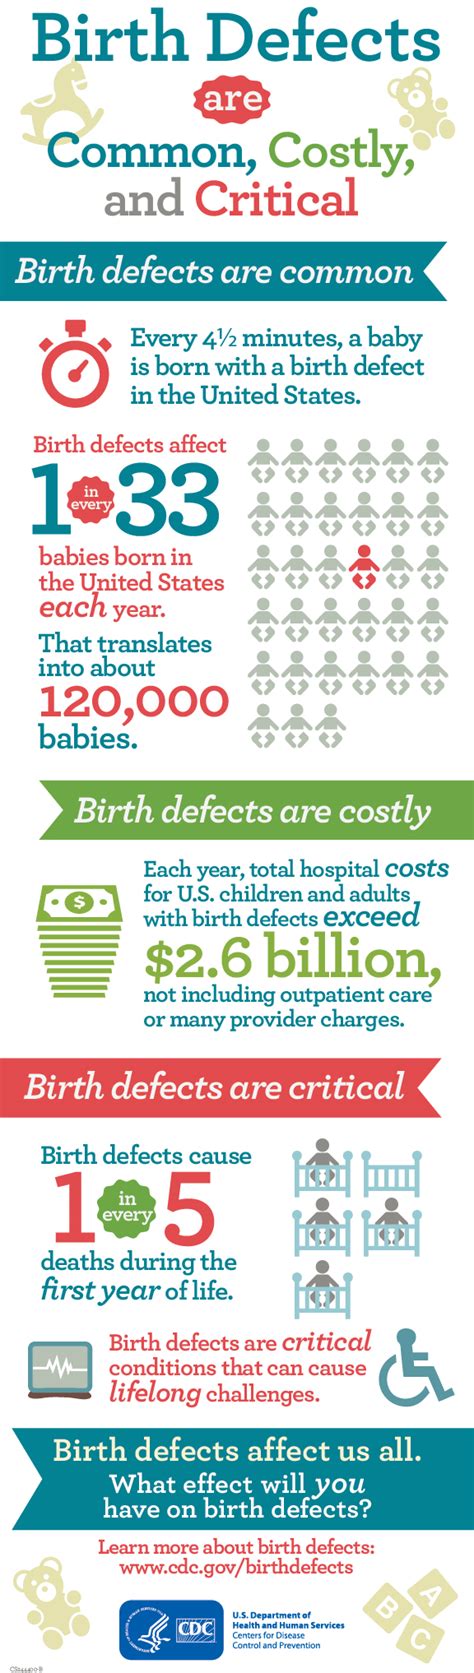 4 things to do during national birth defects prevention month pcha